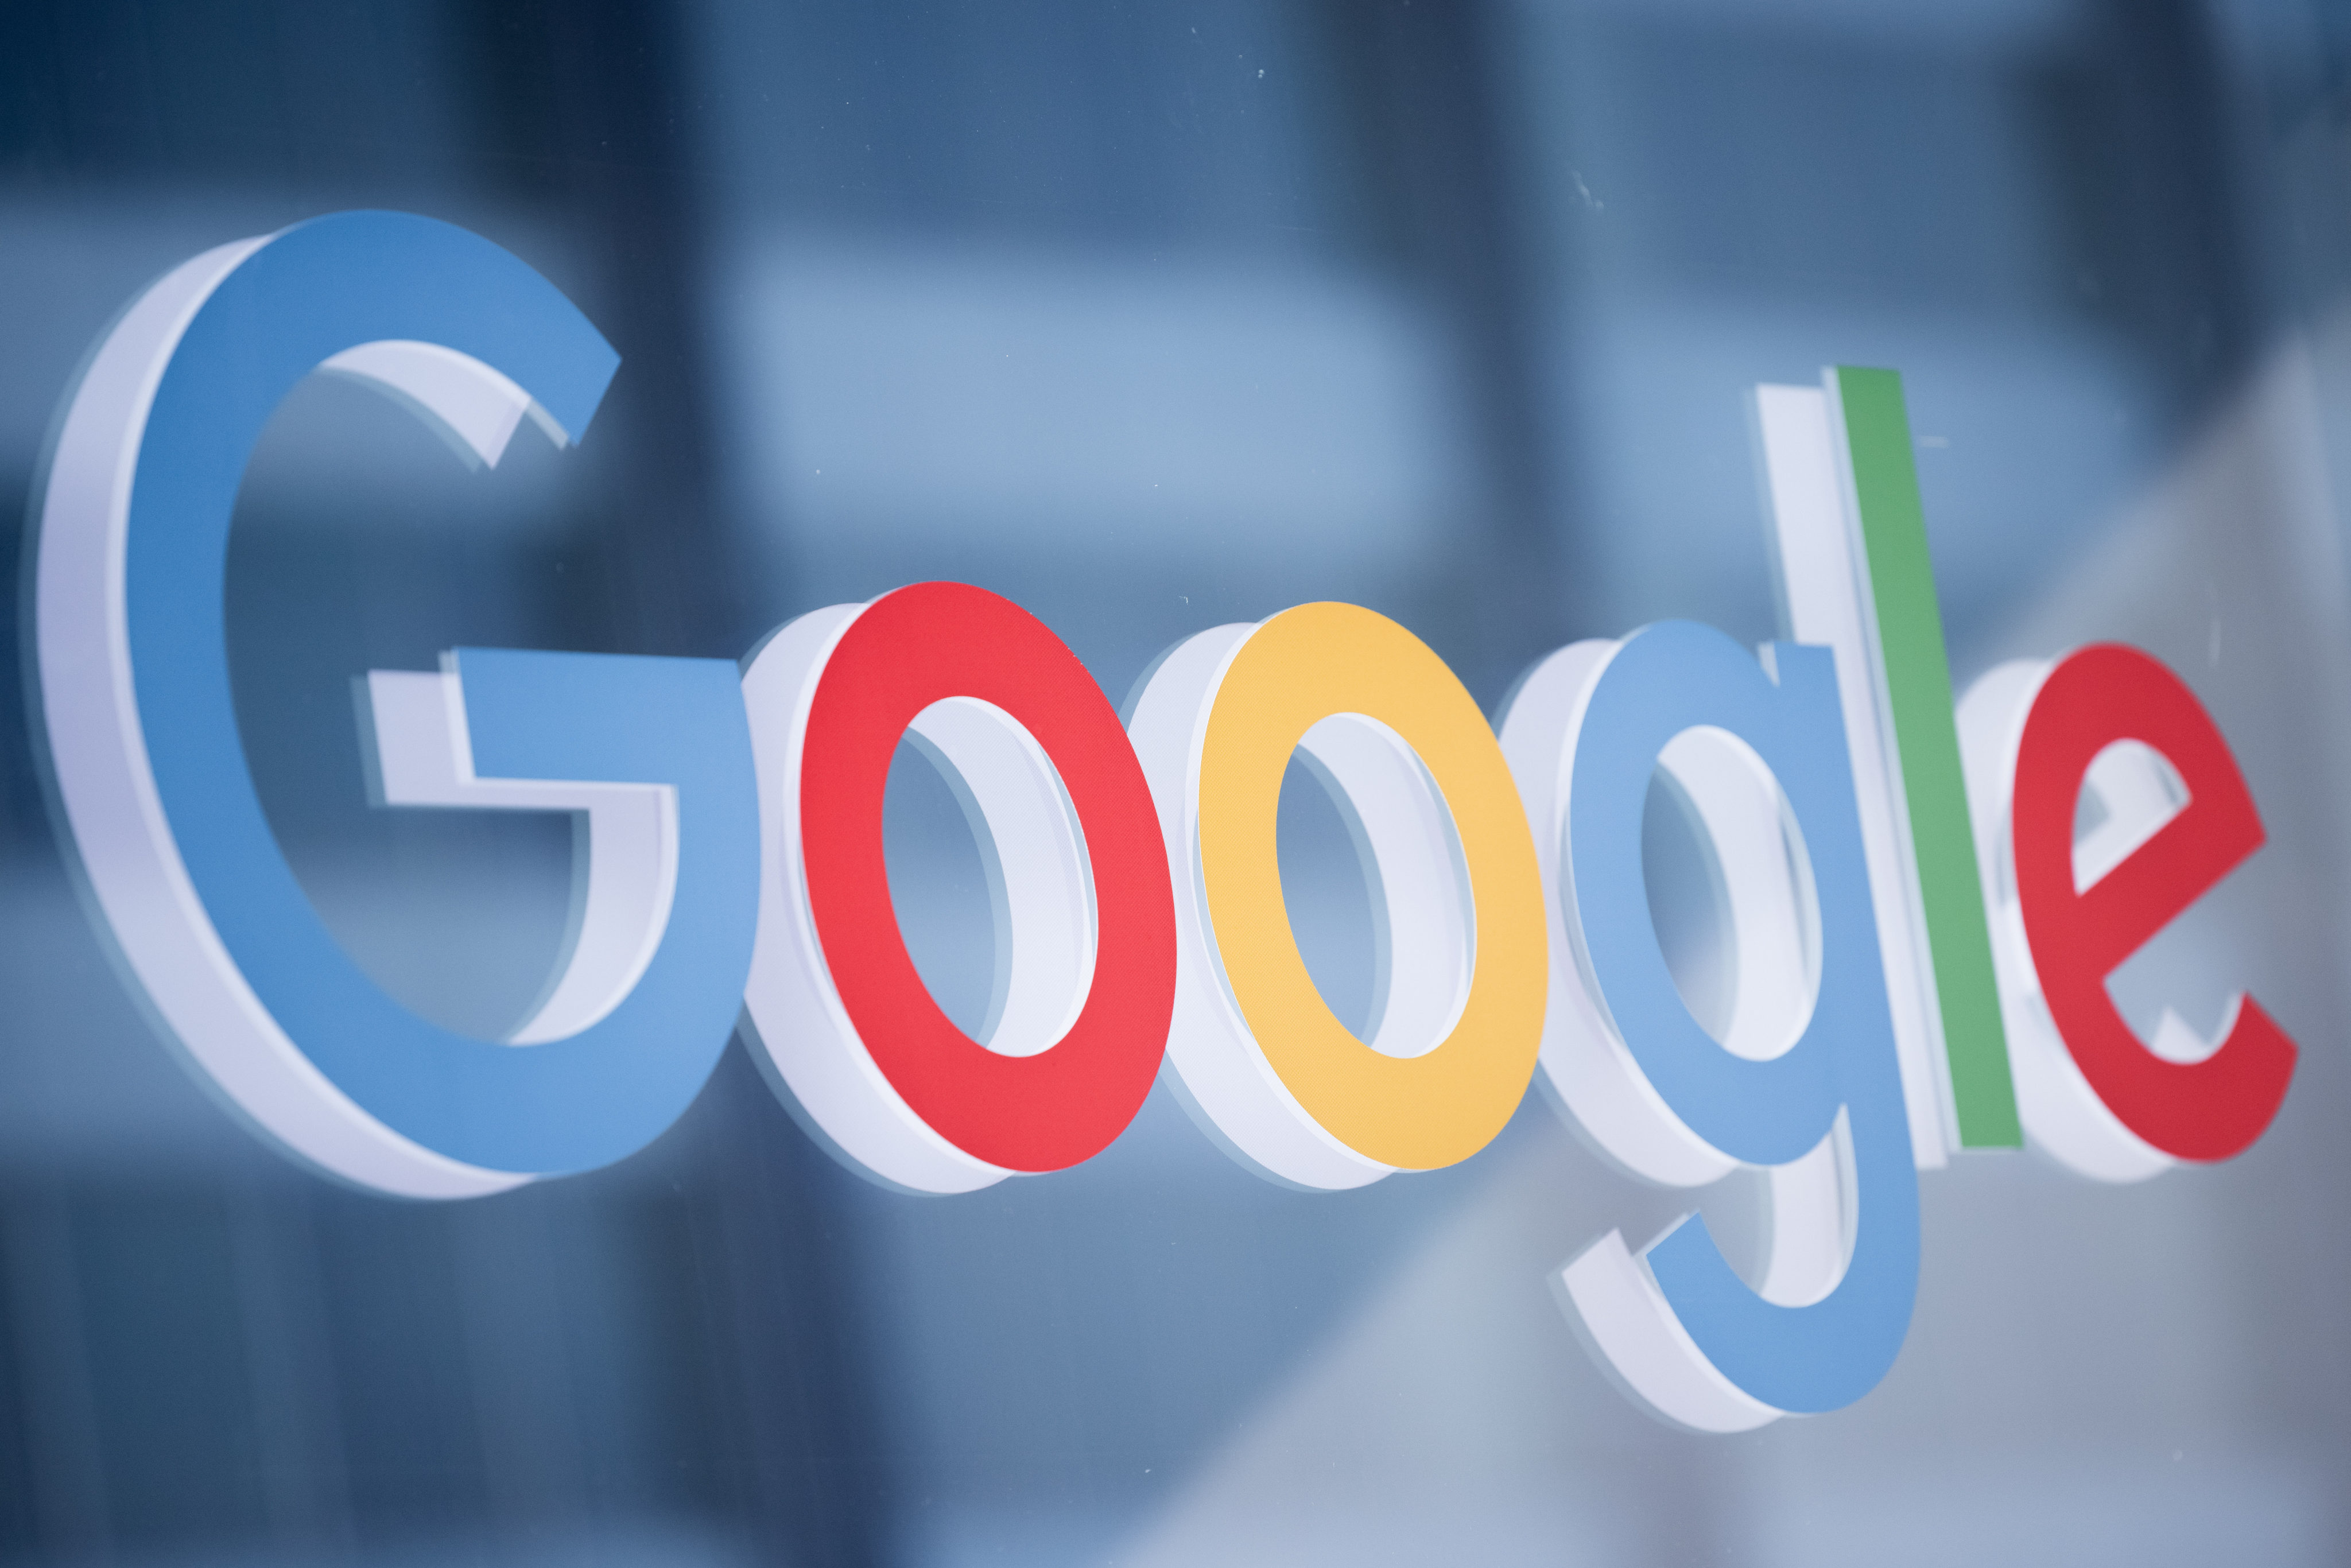 Internet giant Google has said it will not manipulate organic search results. Photo: Dpa